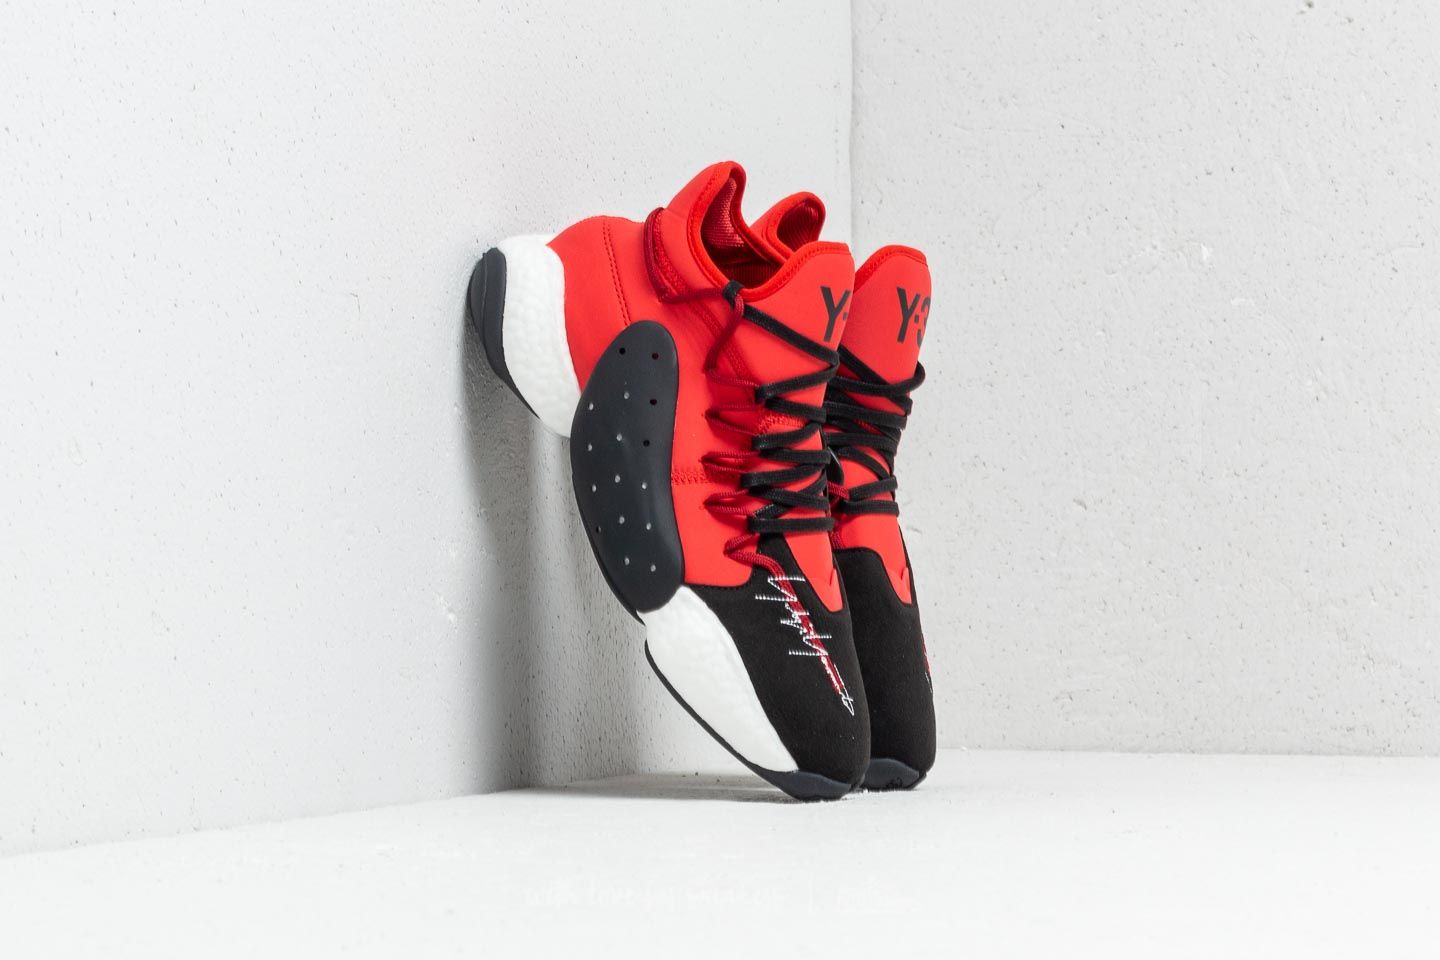 Buty męskie Y-3 BYW BBALL Core Black/ Lush Red/ Core White